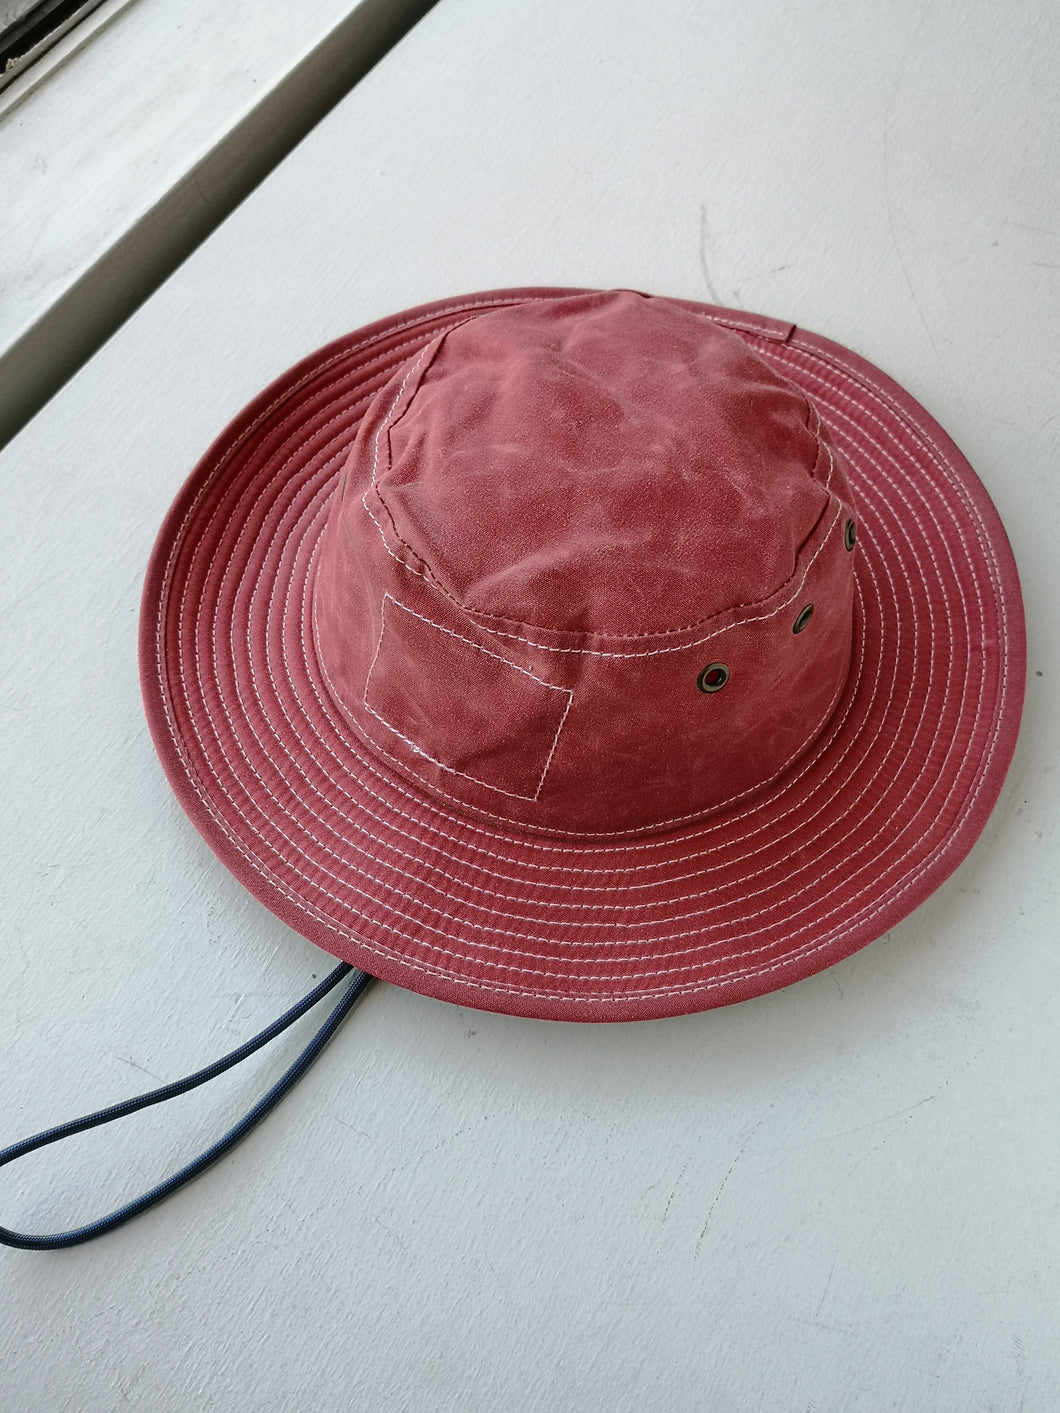 Old Fashioned Standards - Waxed Bucket Hats, in dusty rose